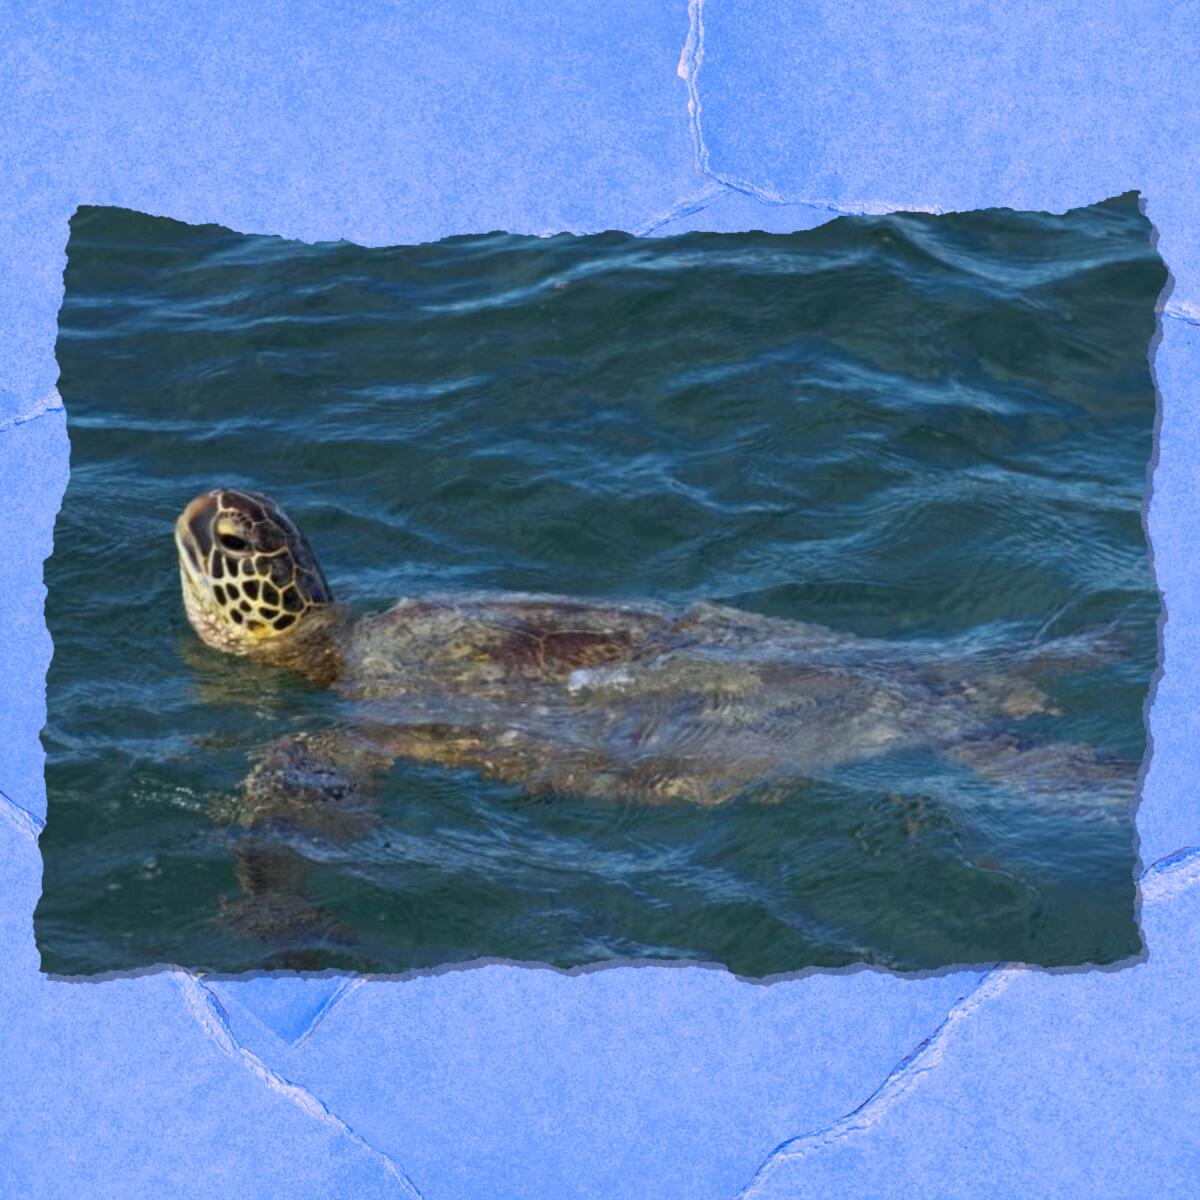 A turtle swims with its head poking above water.